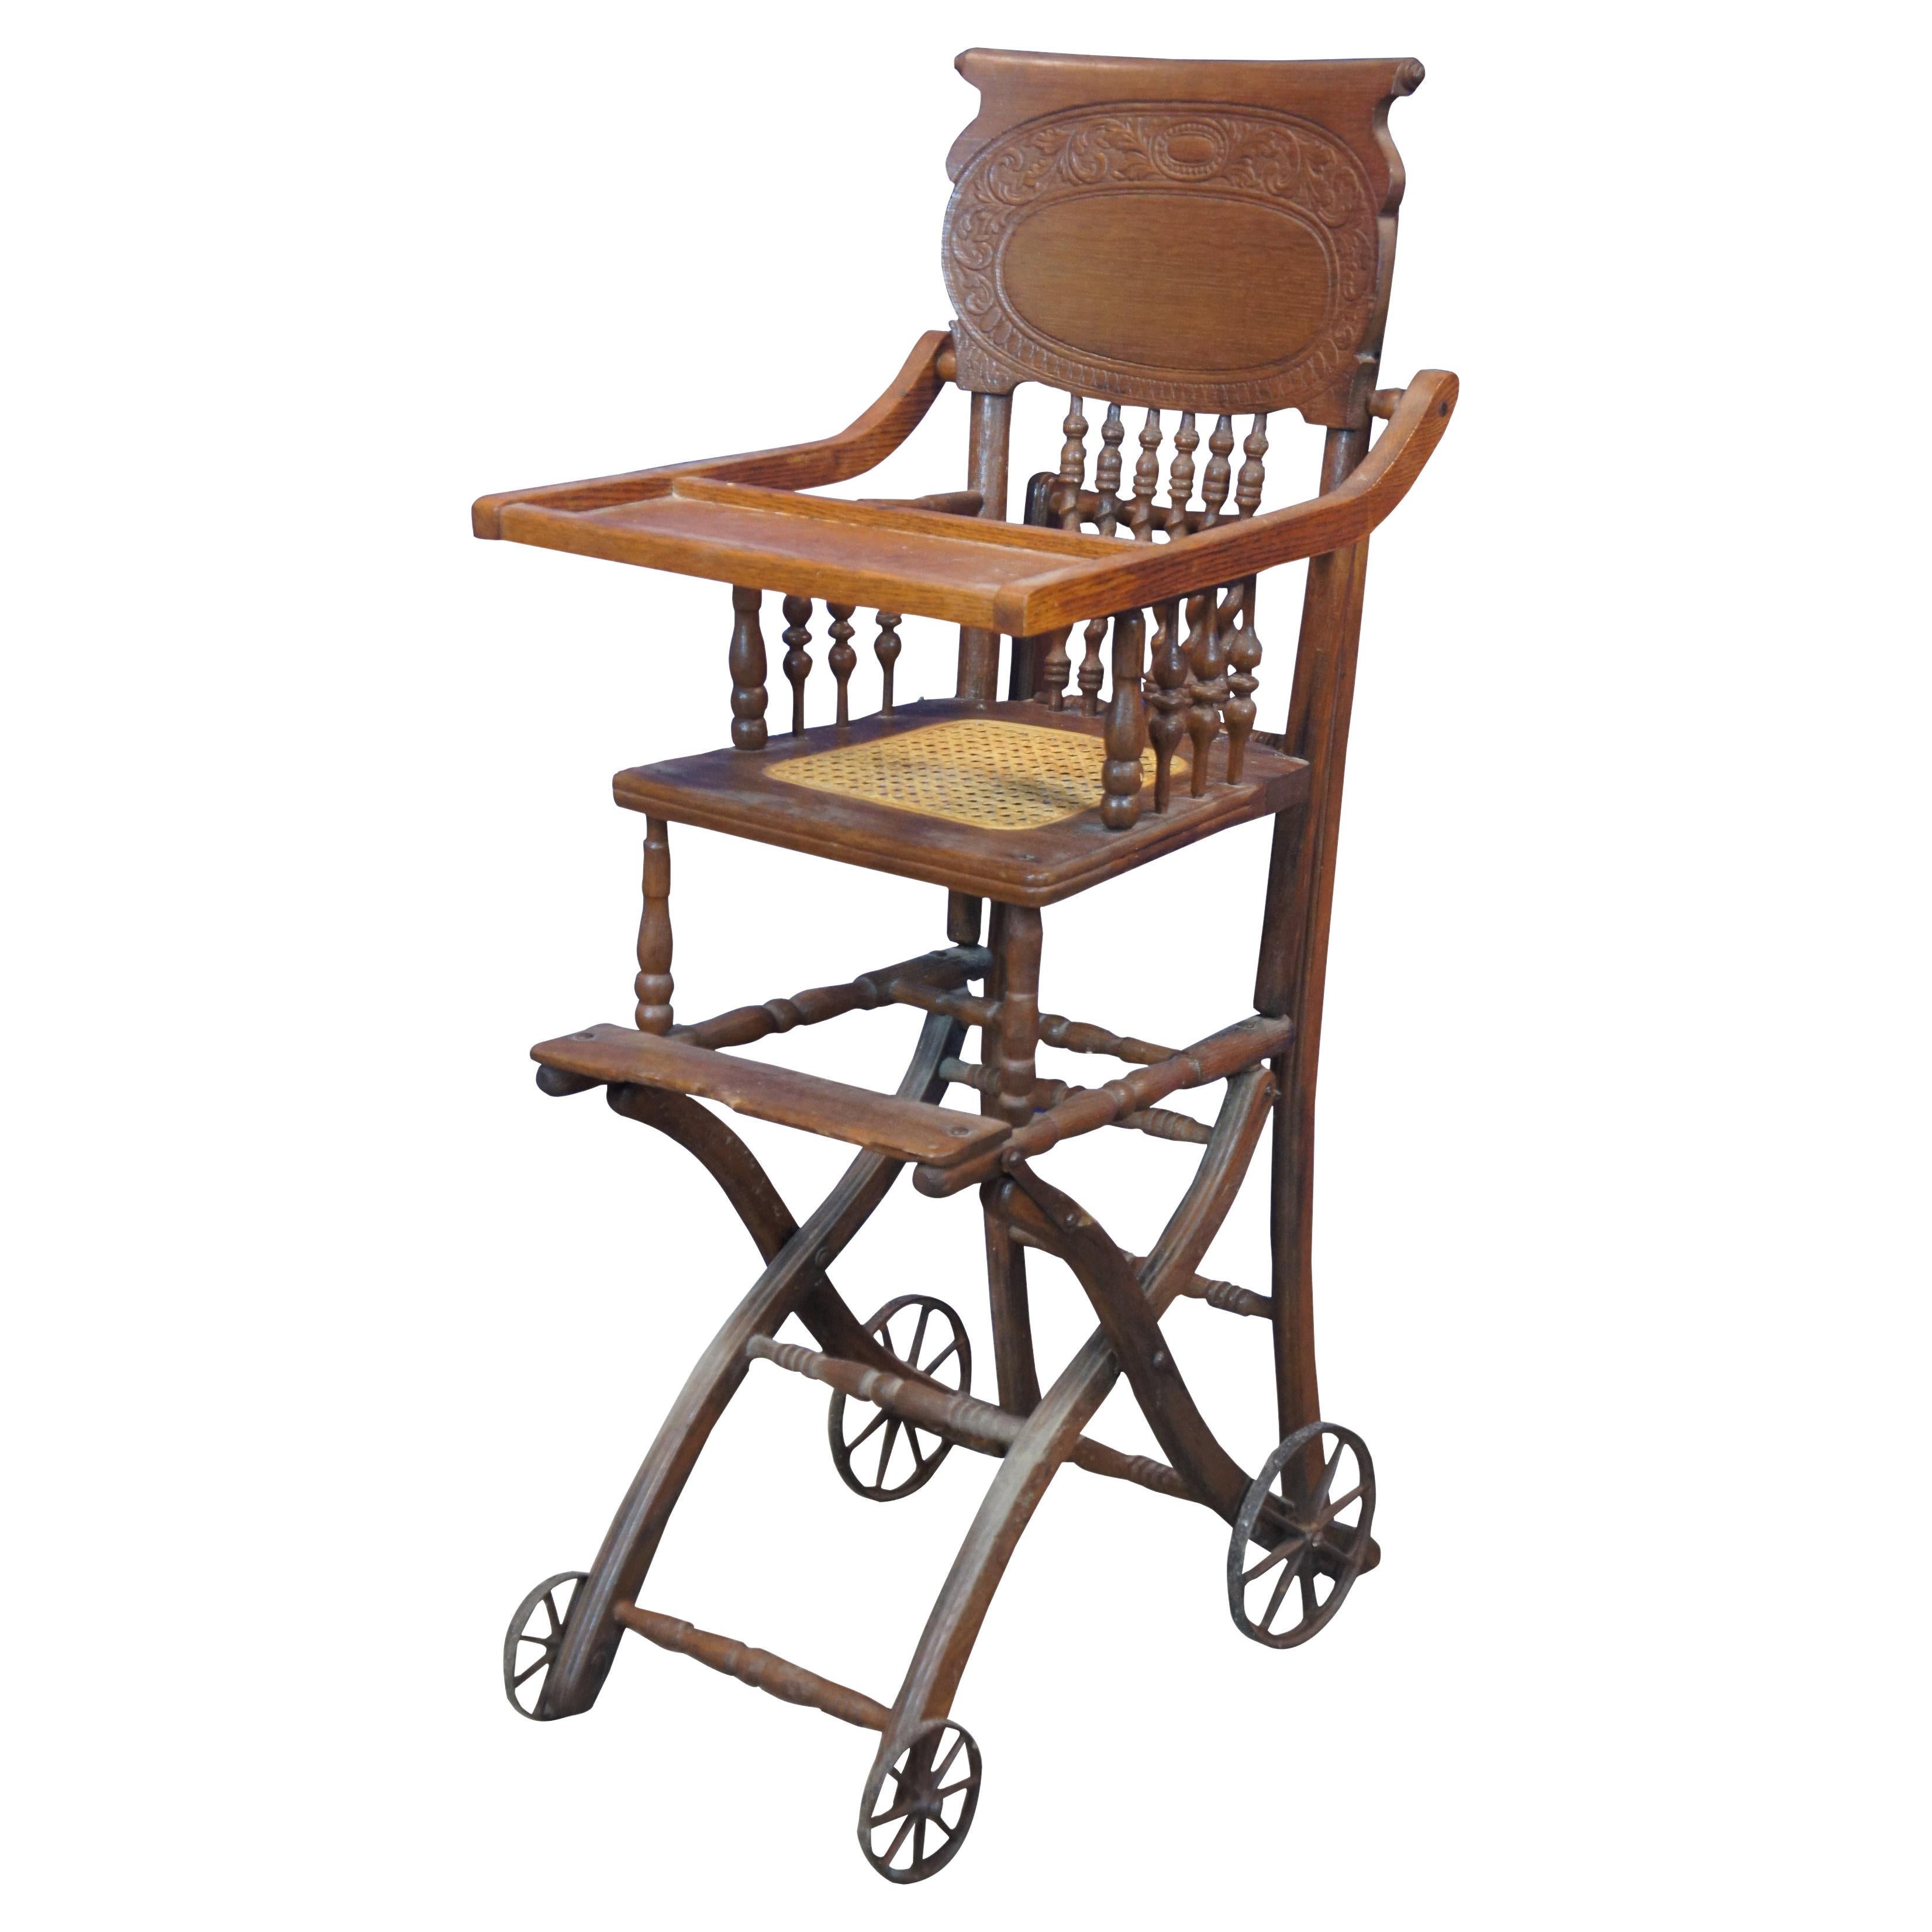 Antique Victorian Oak Caned Convertible Seat High Chair Stroller Carriage